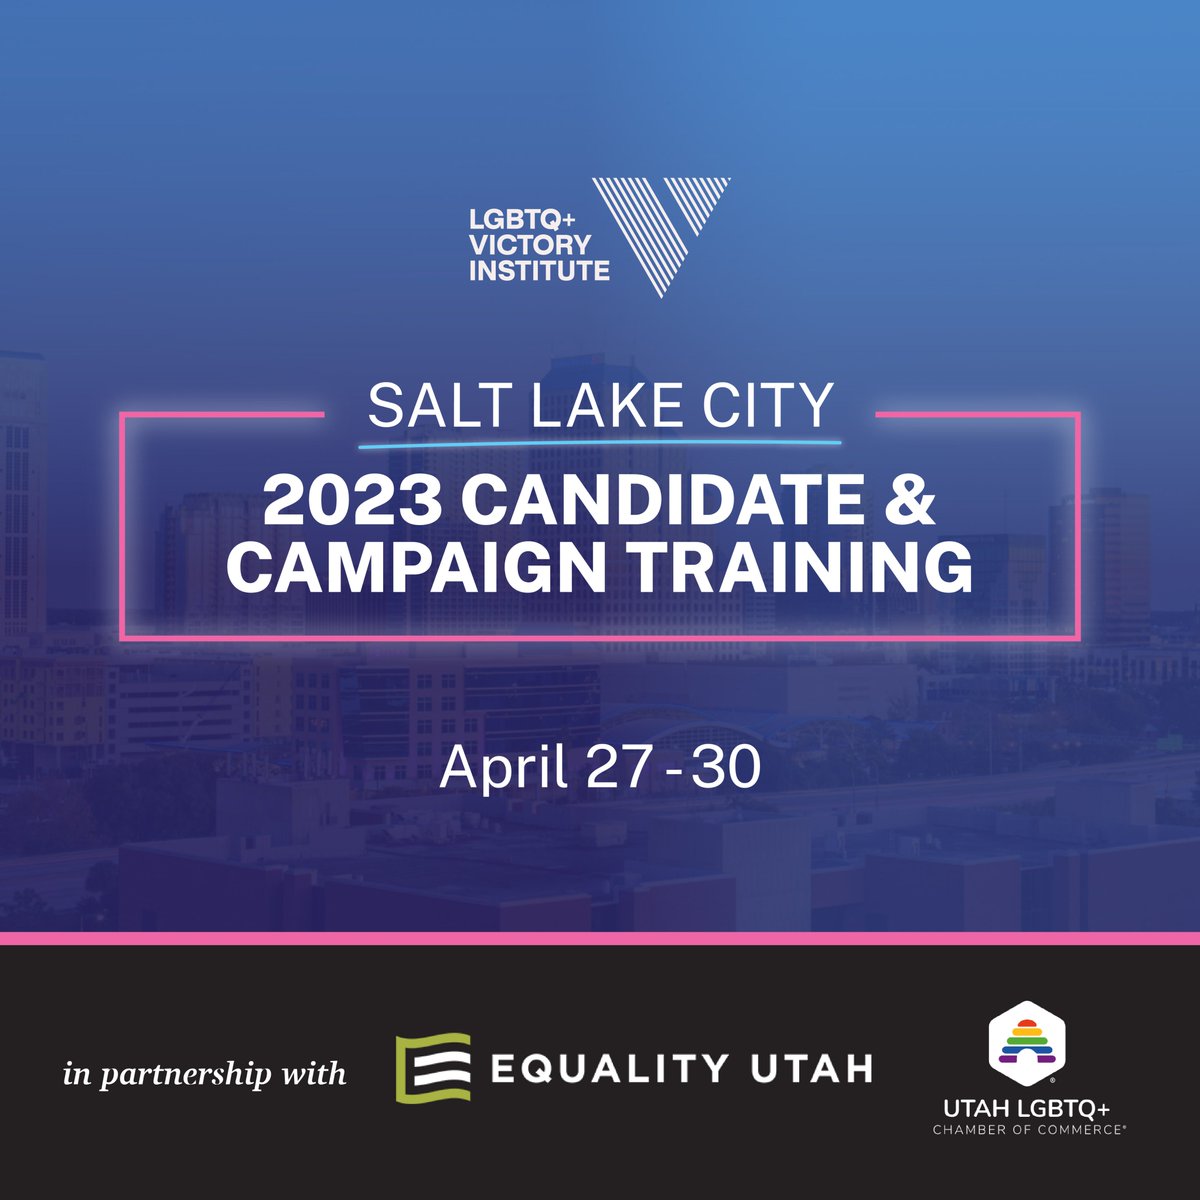 Are you LGBTQ+ and either running for office or planning to in the next 2 years? Then join us in Salt Lake City for our four-day Candidate & Campaign Training, April 27 - 30. Get all the nuts & bolts of building a winning campaign. Register: victoryinstitute.org/event/candidat…